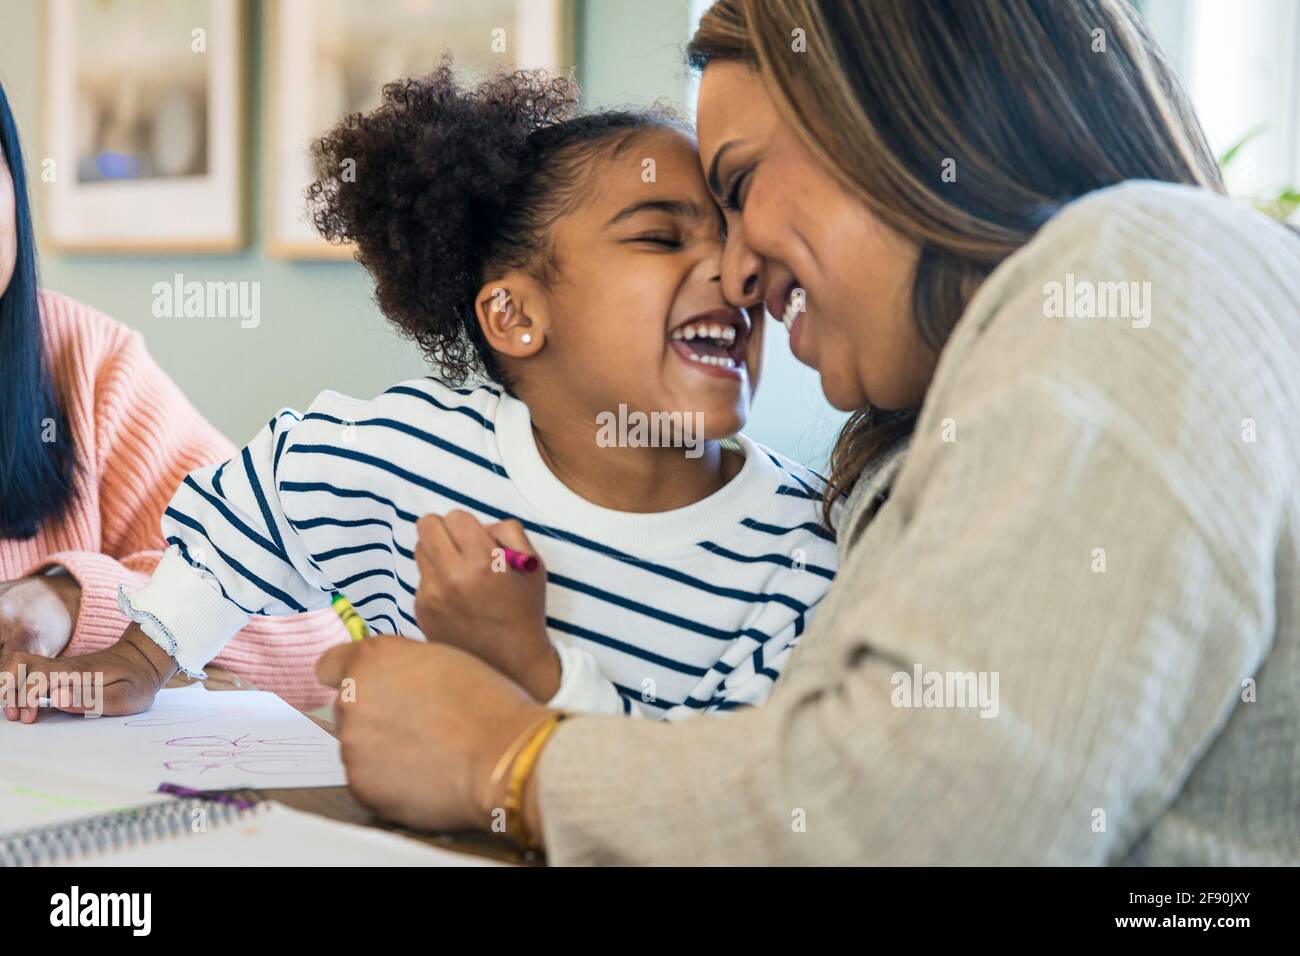 Cheerful daughter rubbing nose with mother while learning drawing at home Stock Photo